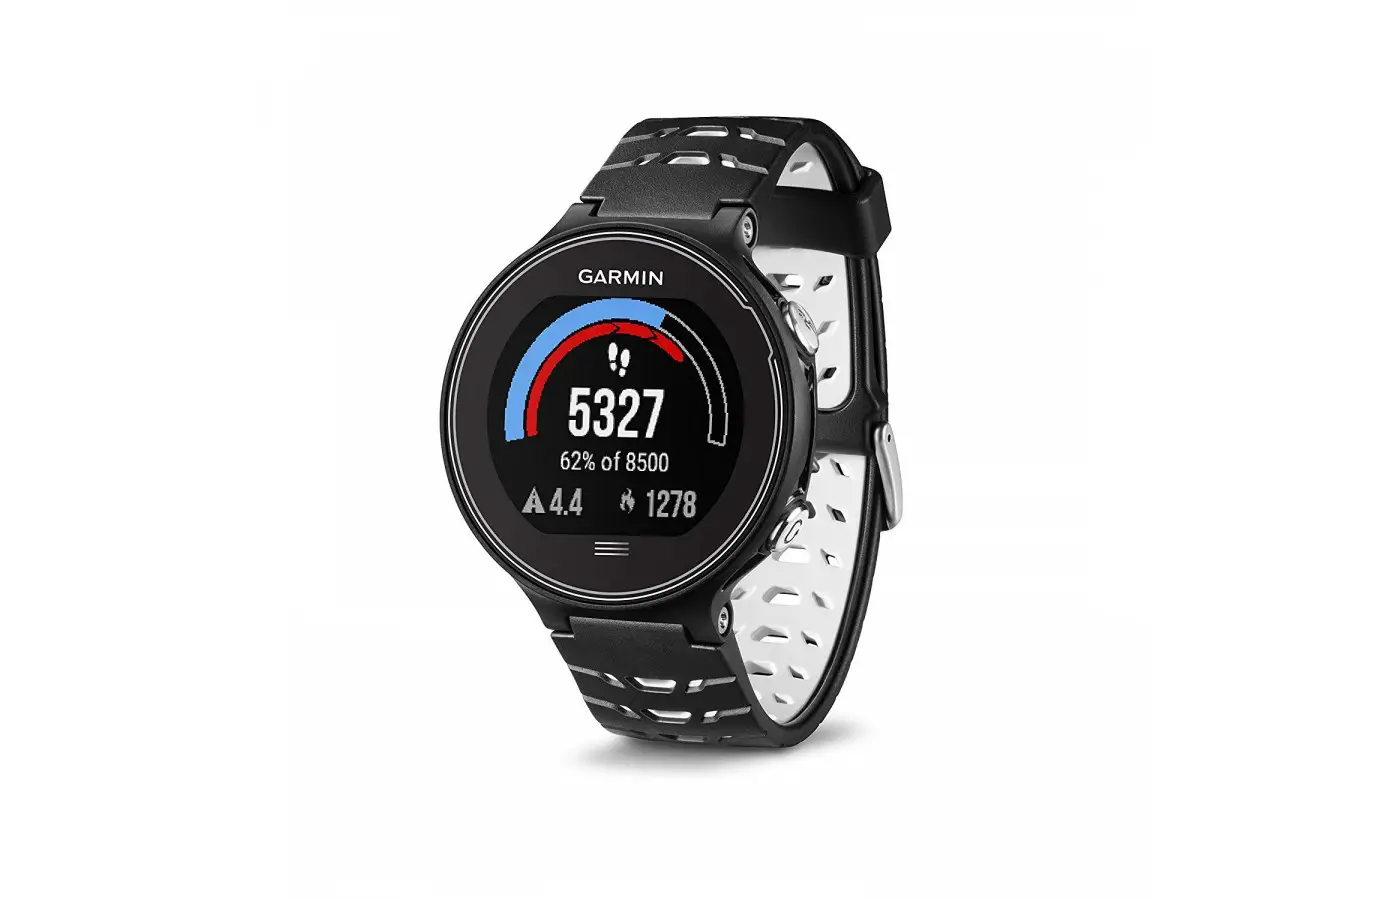 The Garmin Forerunner 630 offers a step counter in order to offer motivation.